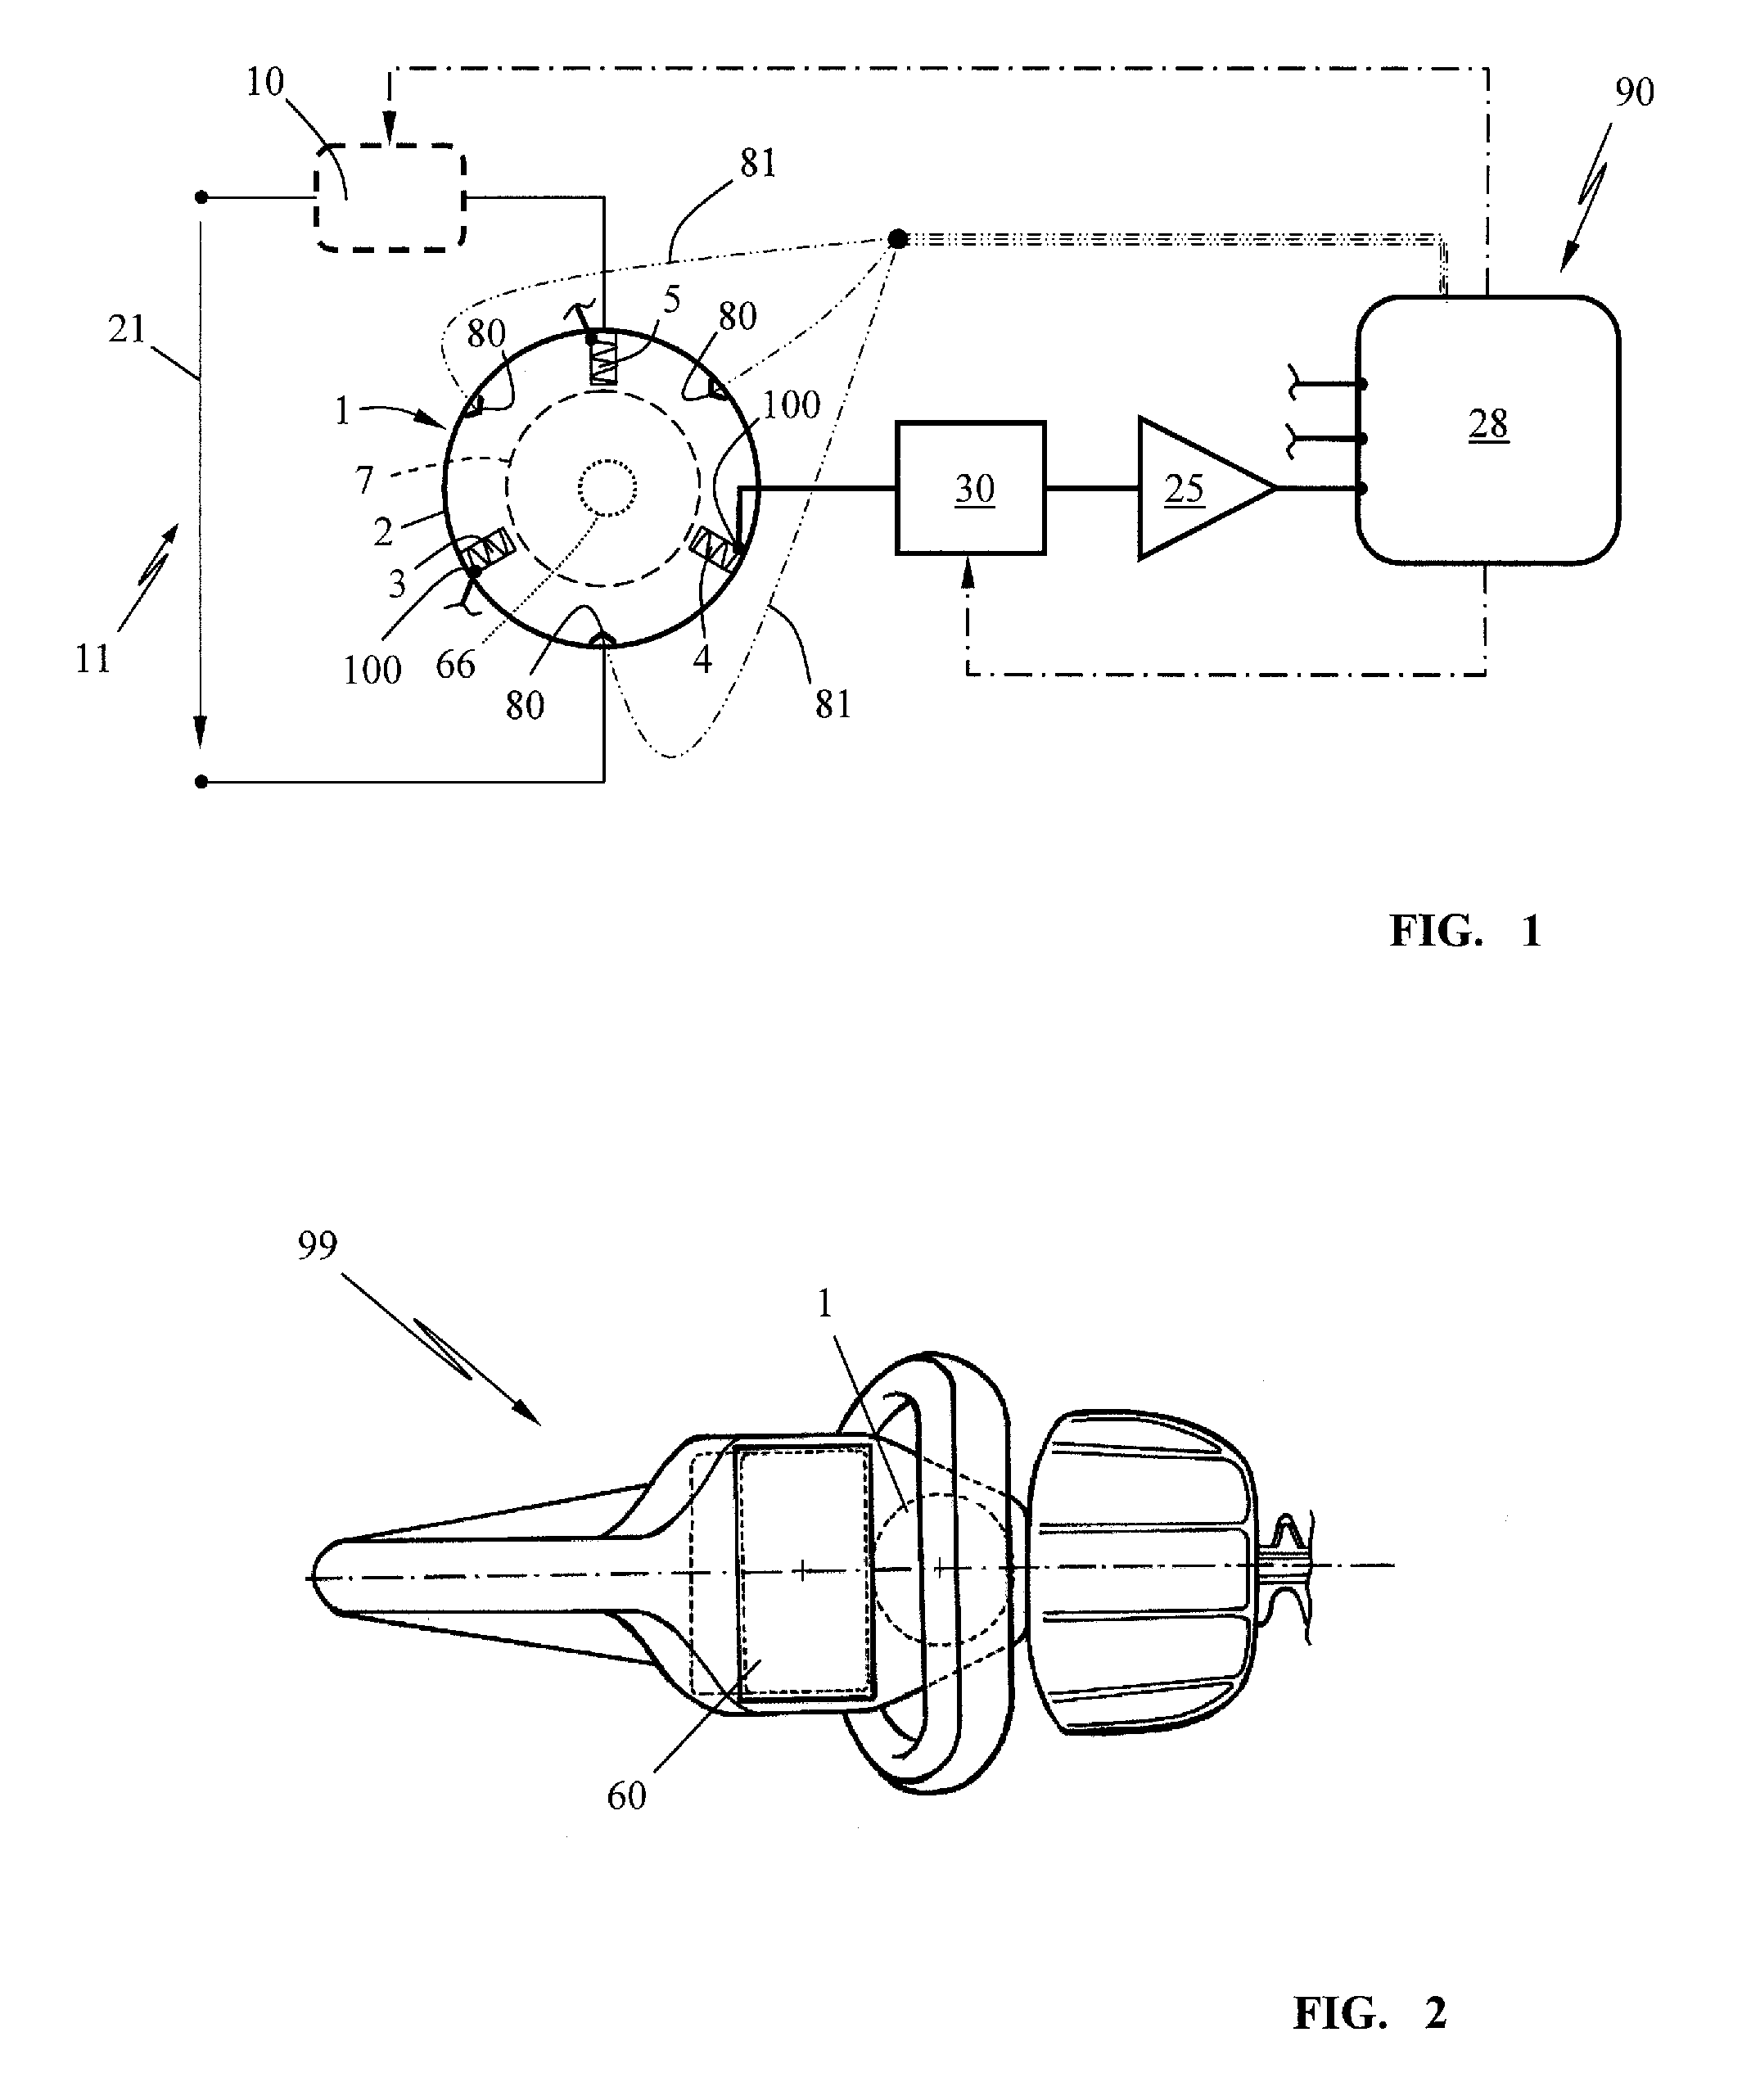 Battery operated electric motor in a work apparatus